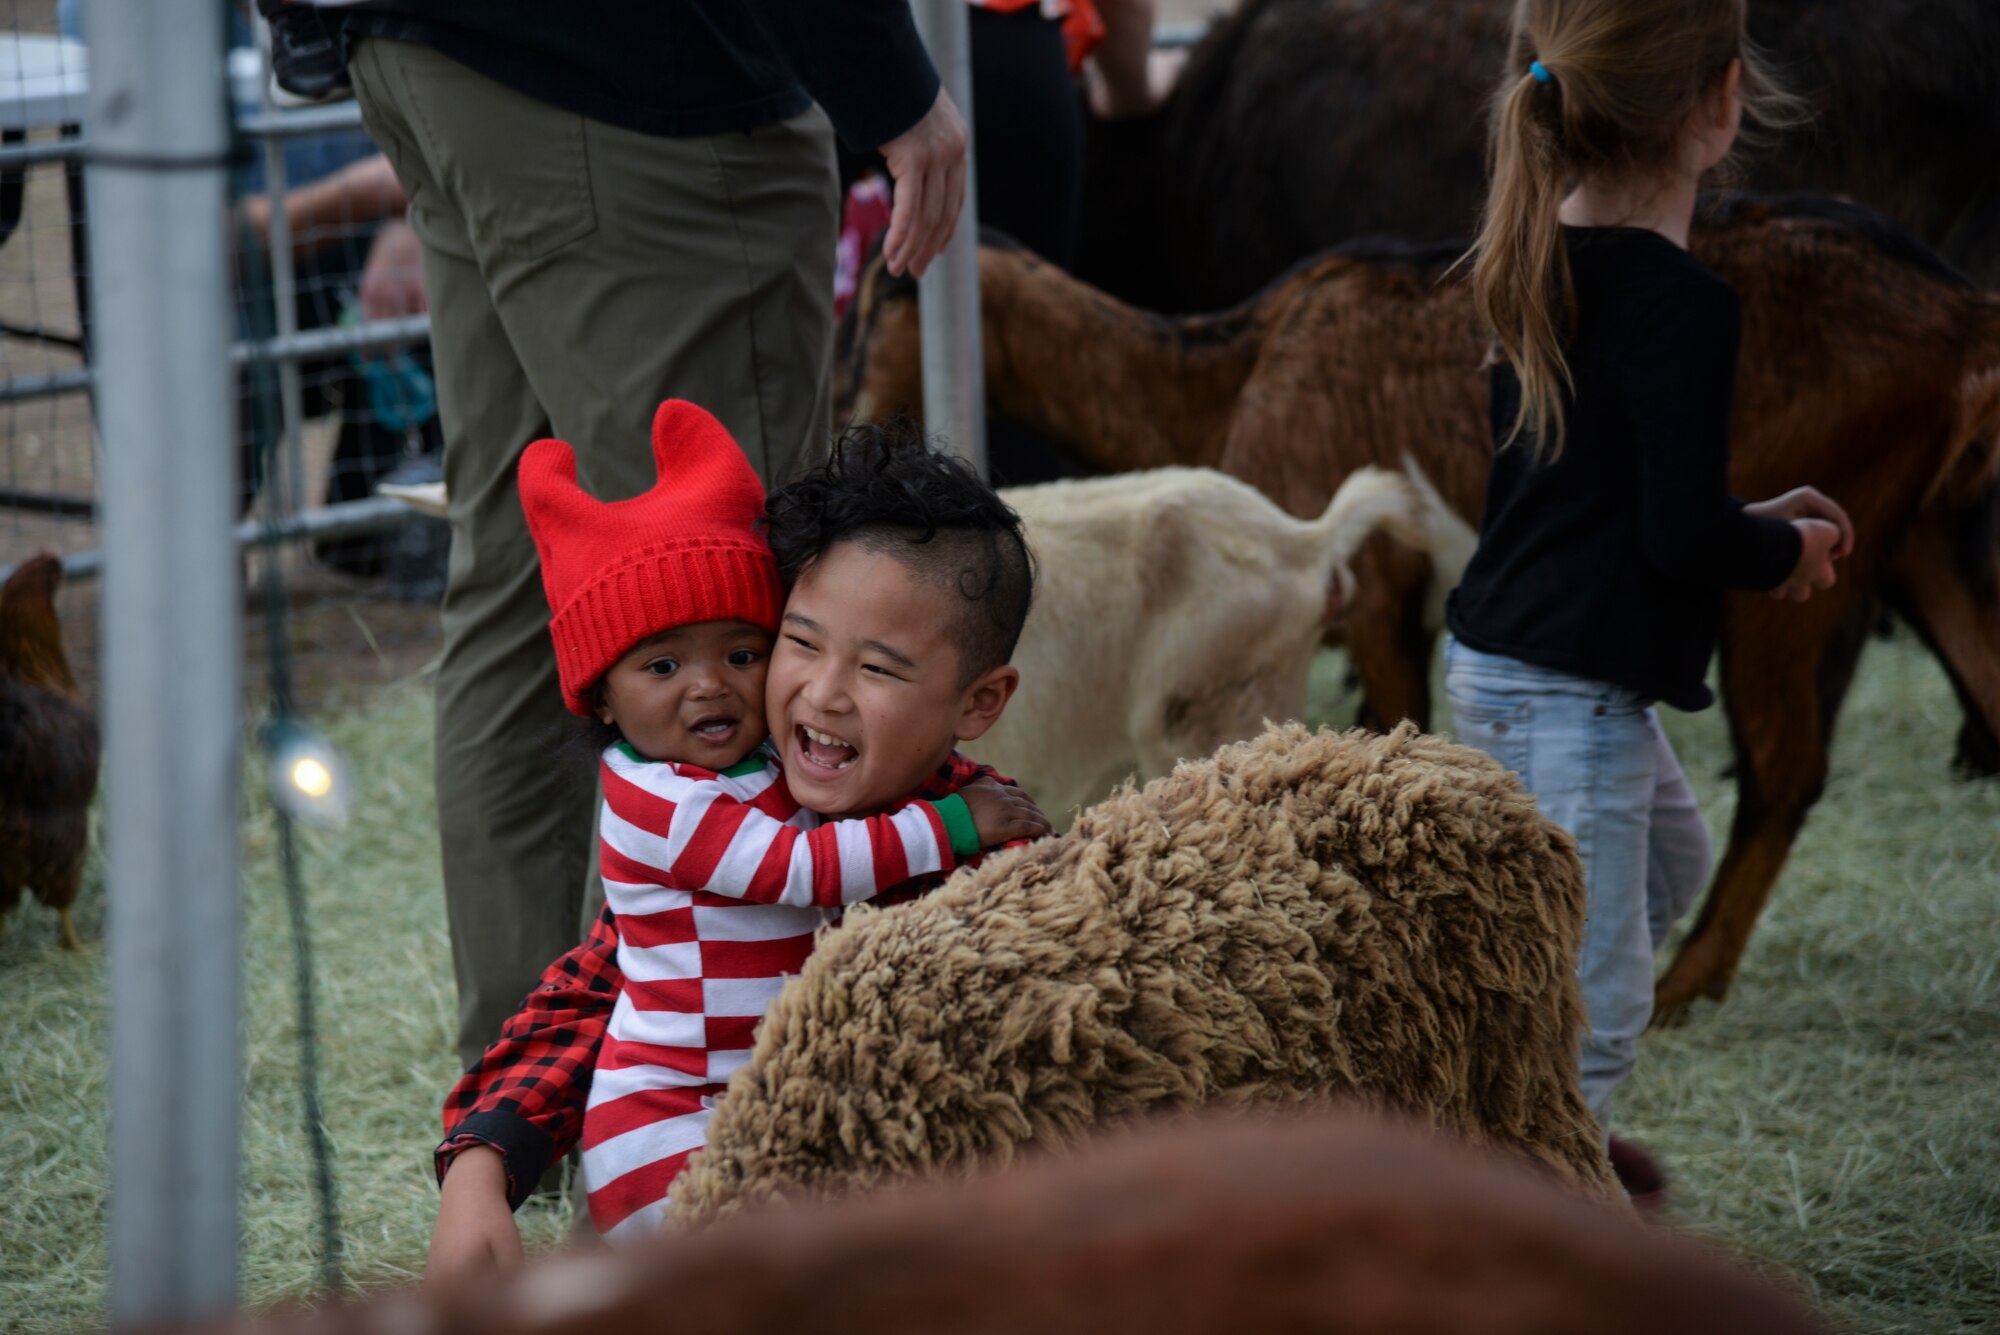 a photo of Two kids celebrating during a base holiday event.